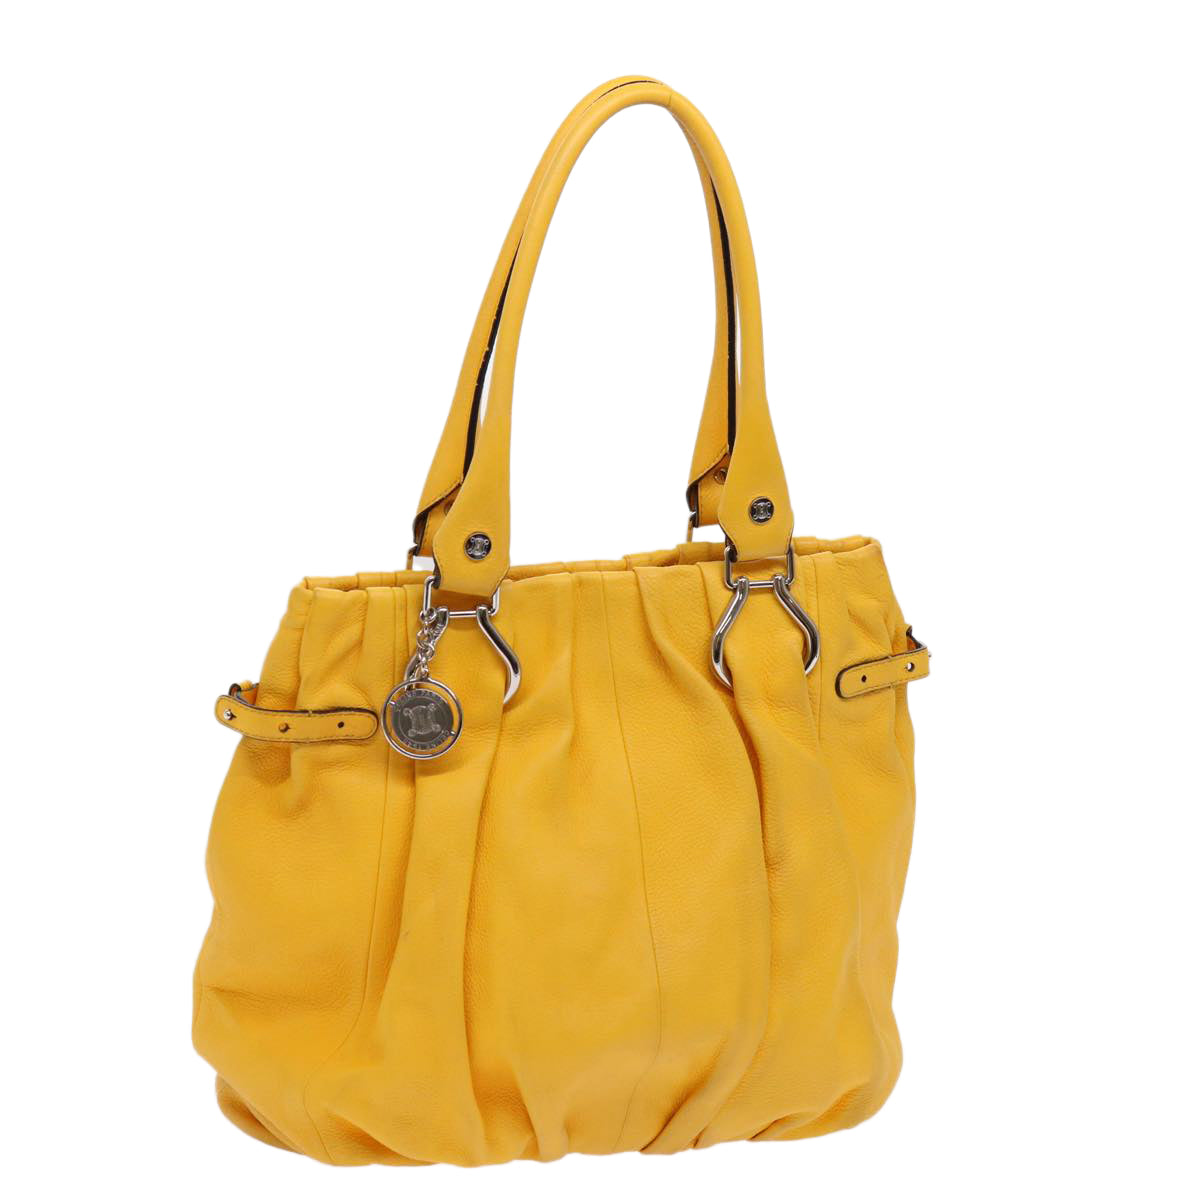 CELINE Tote Bag Leather Yellow Auth bs13073